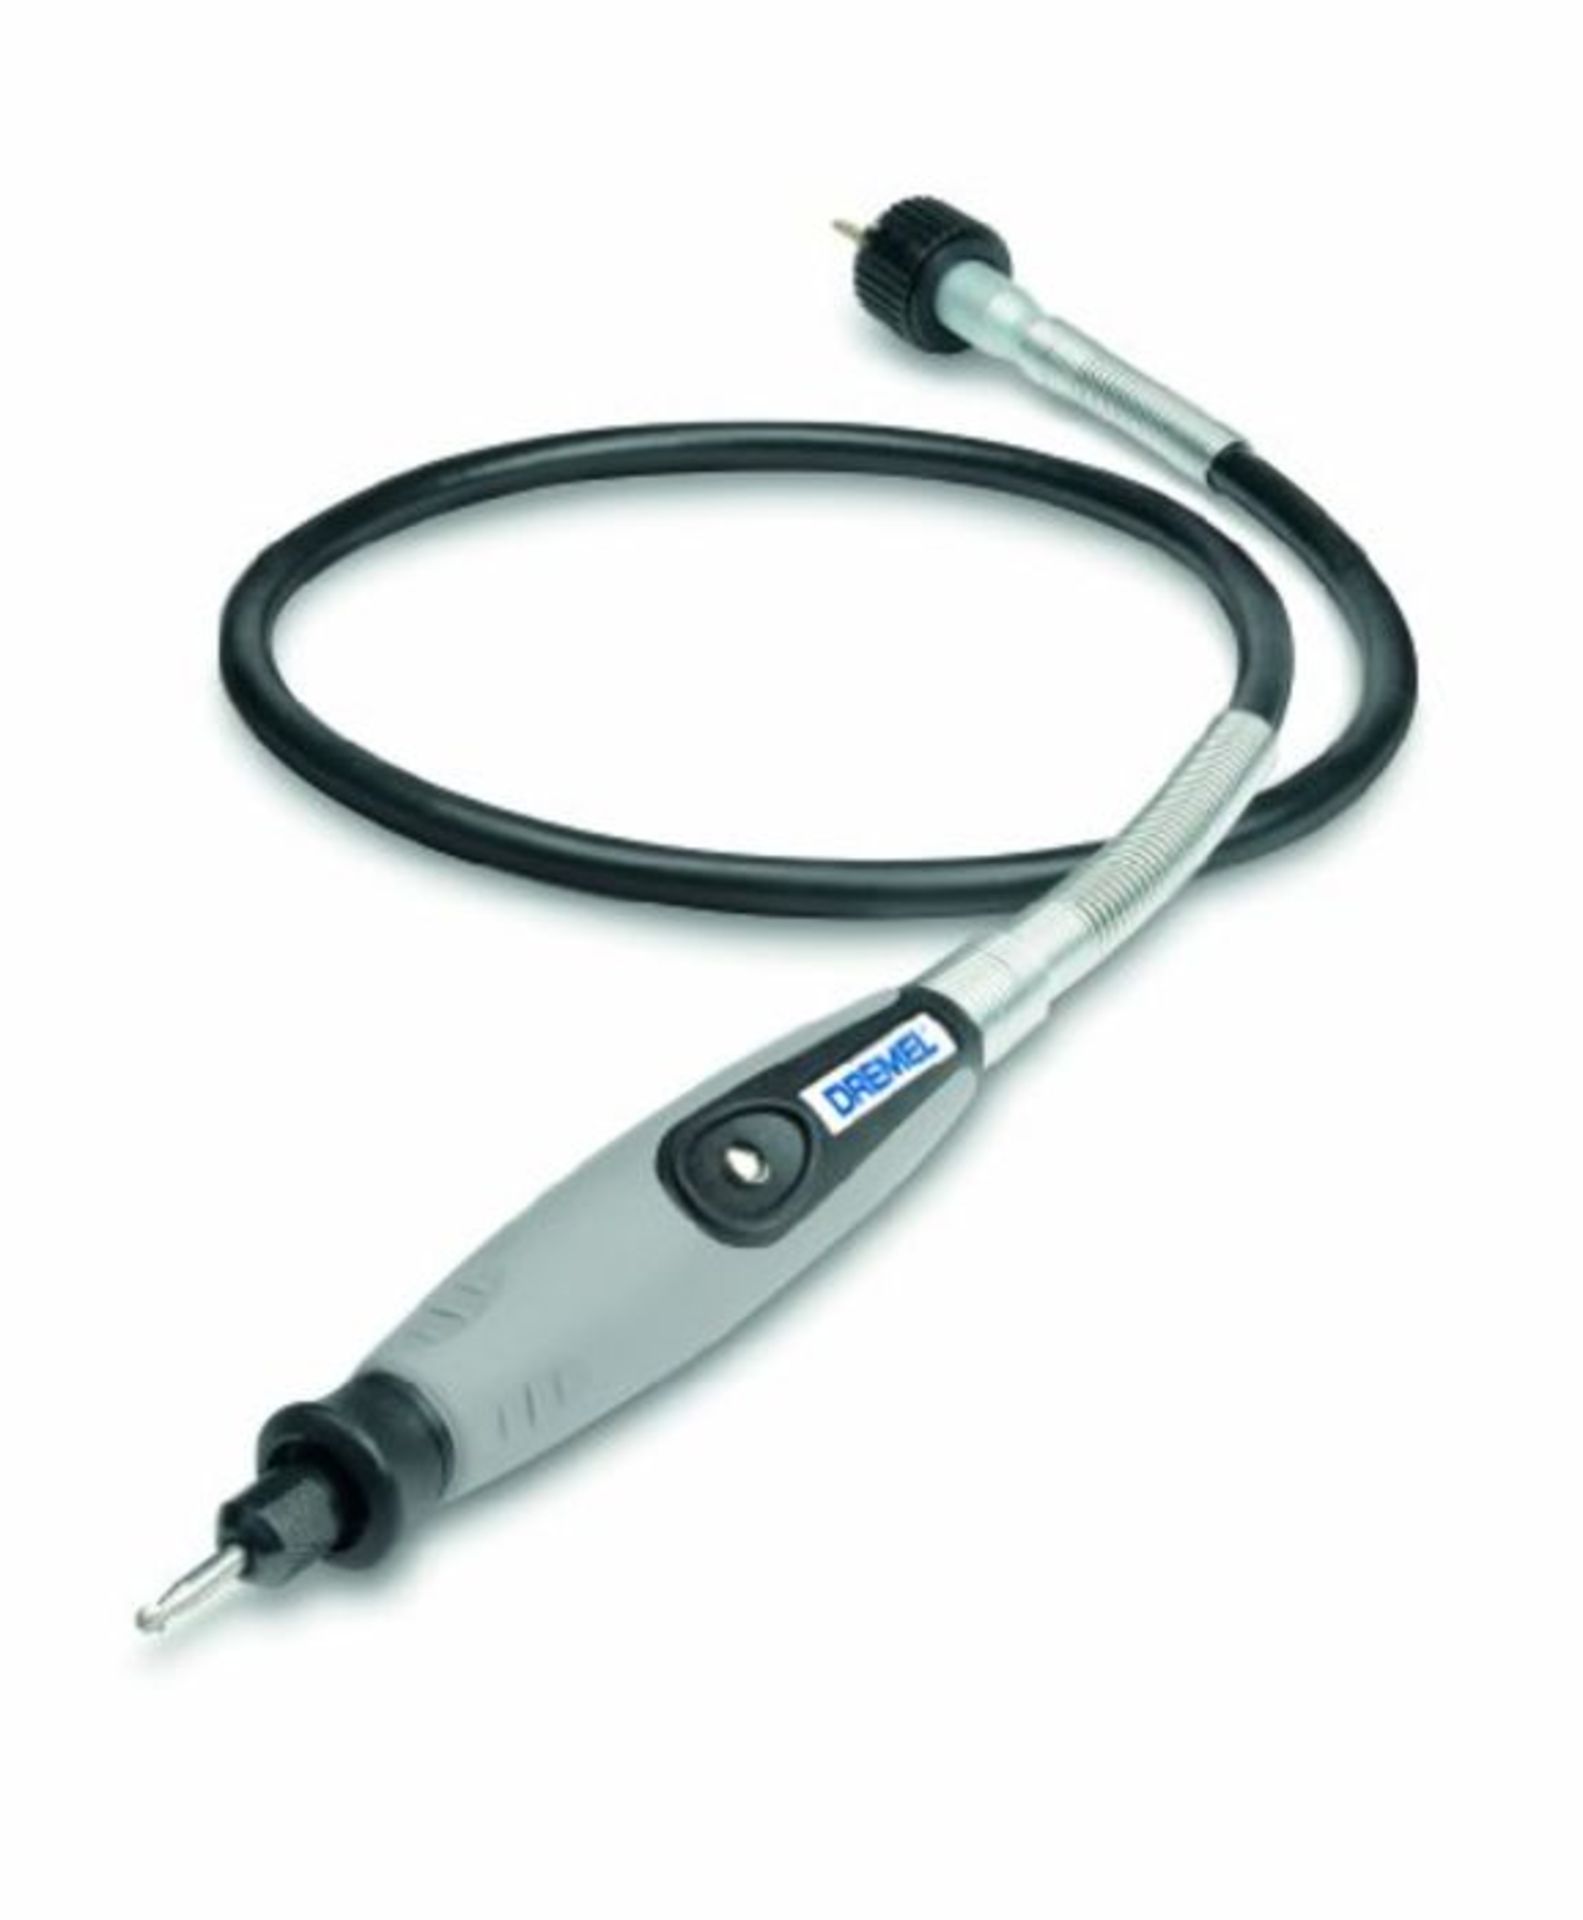 Dremel 225 flexible shaft - with a bending radius of 127 mm (without accessories)